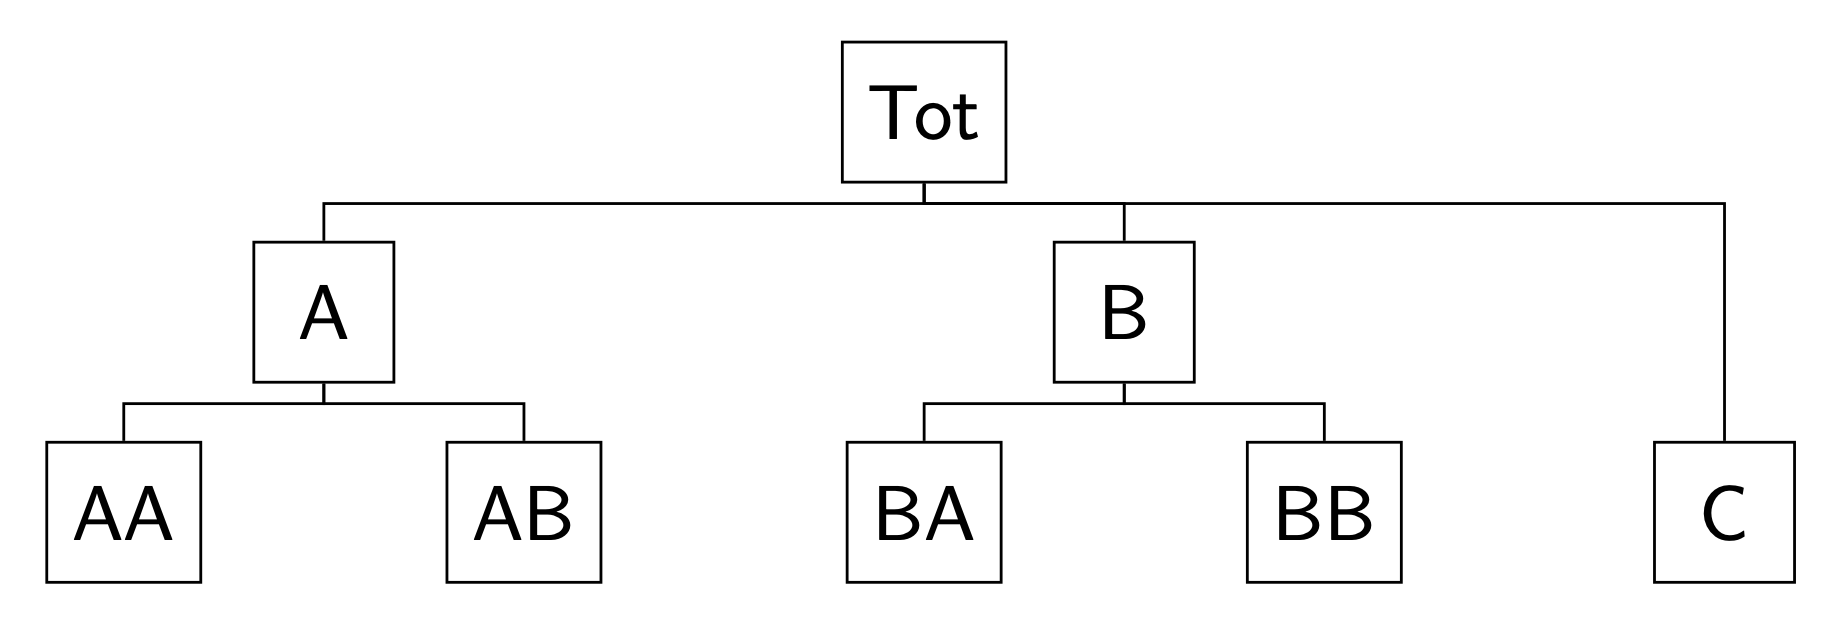 Cross-sectional hierarchy